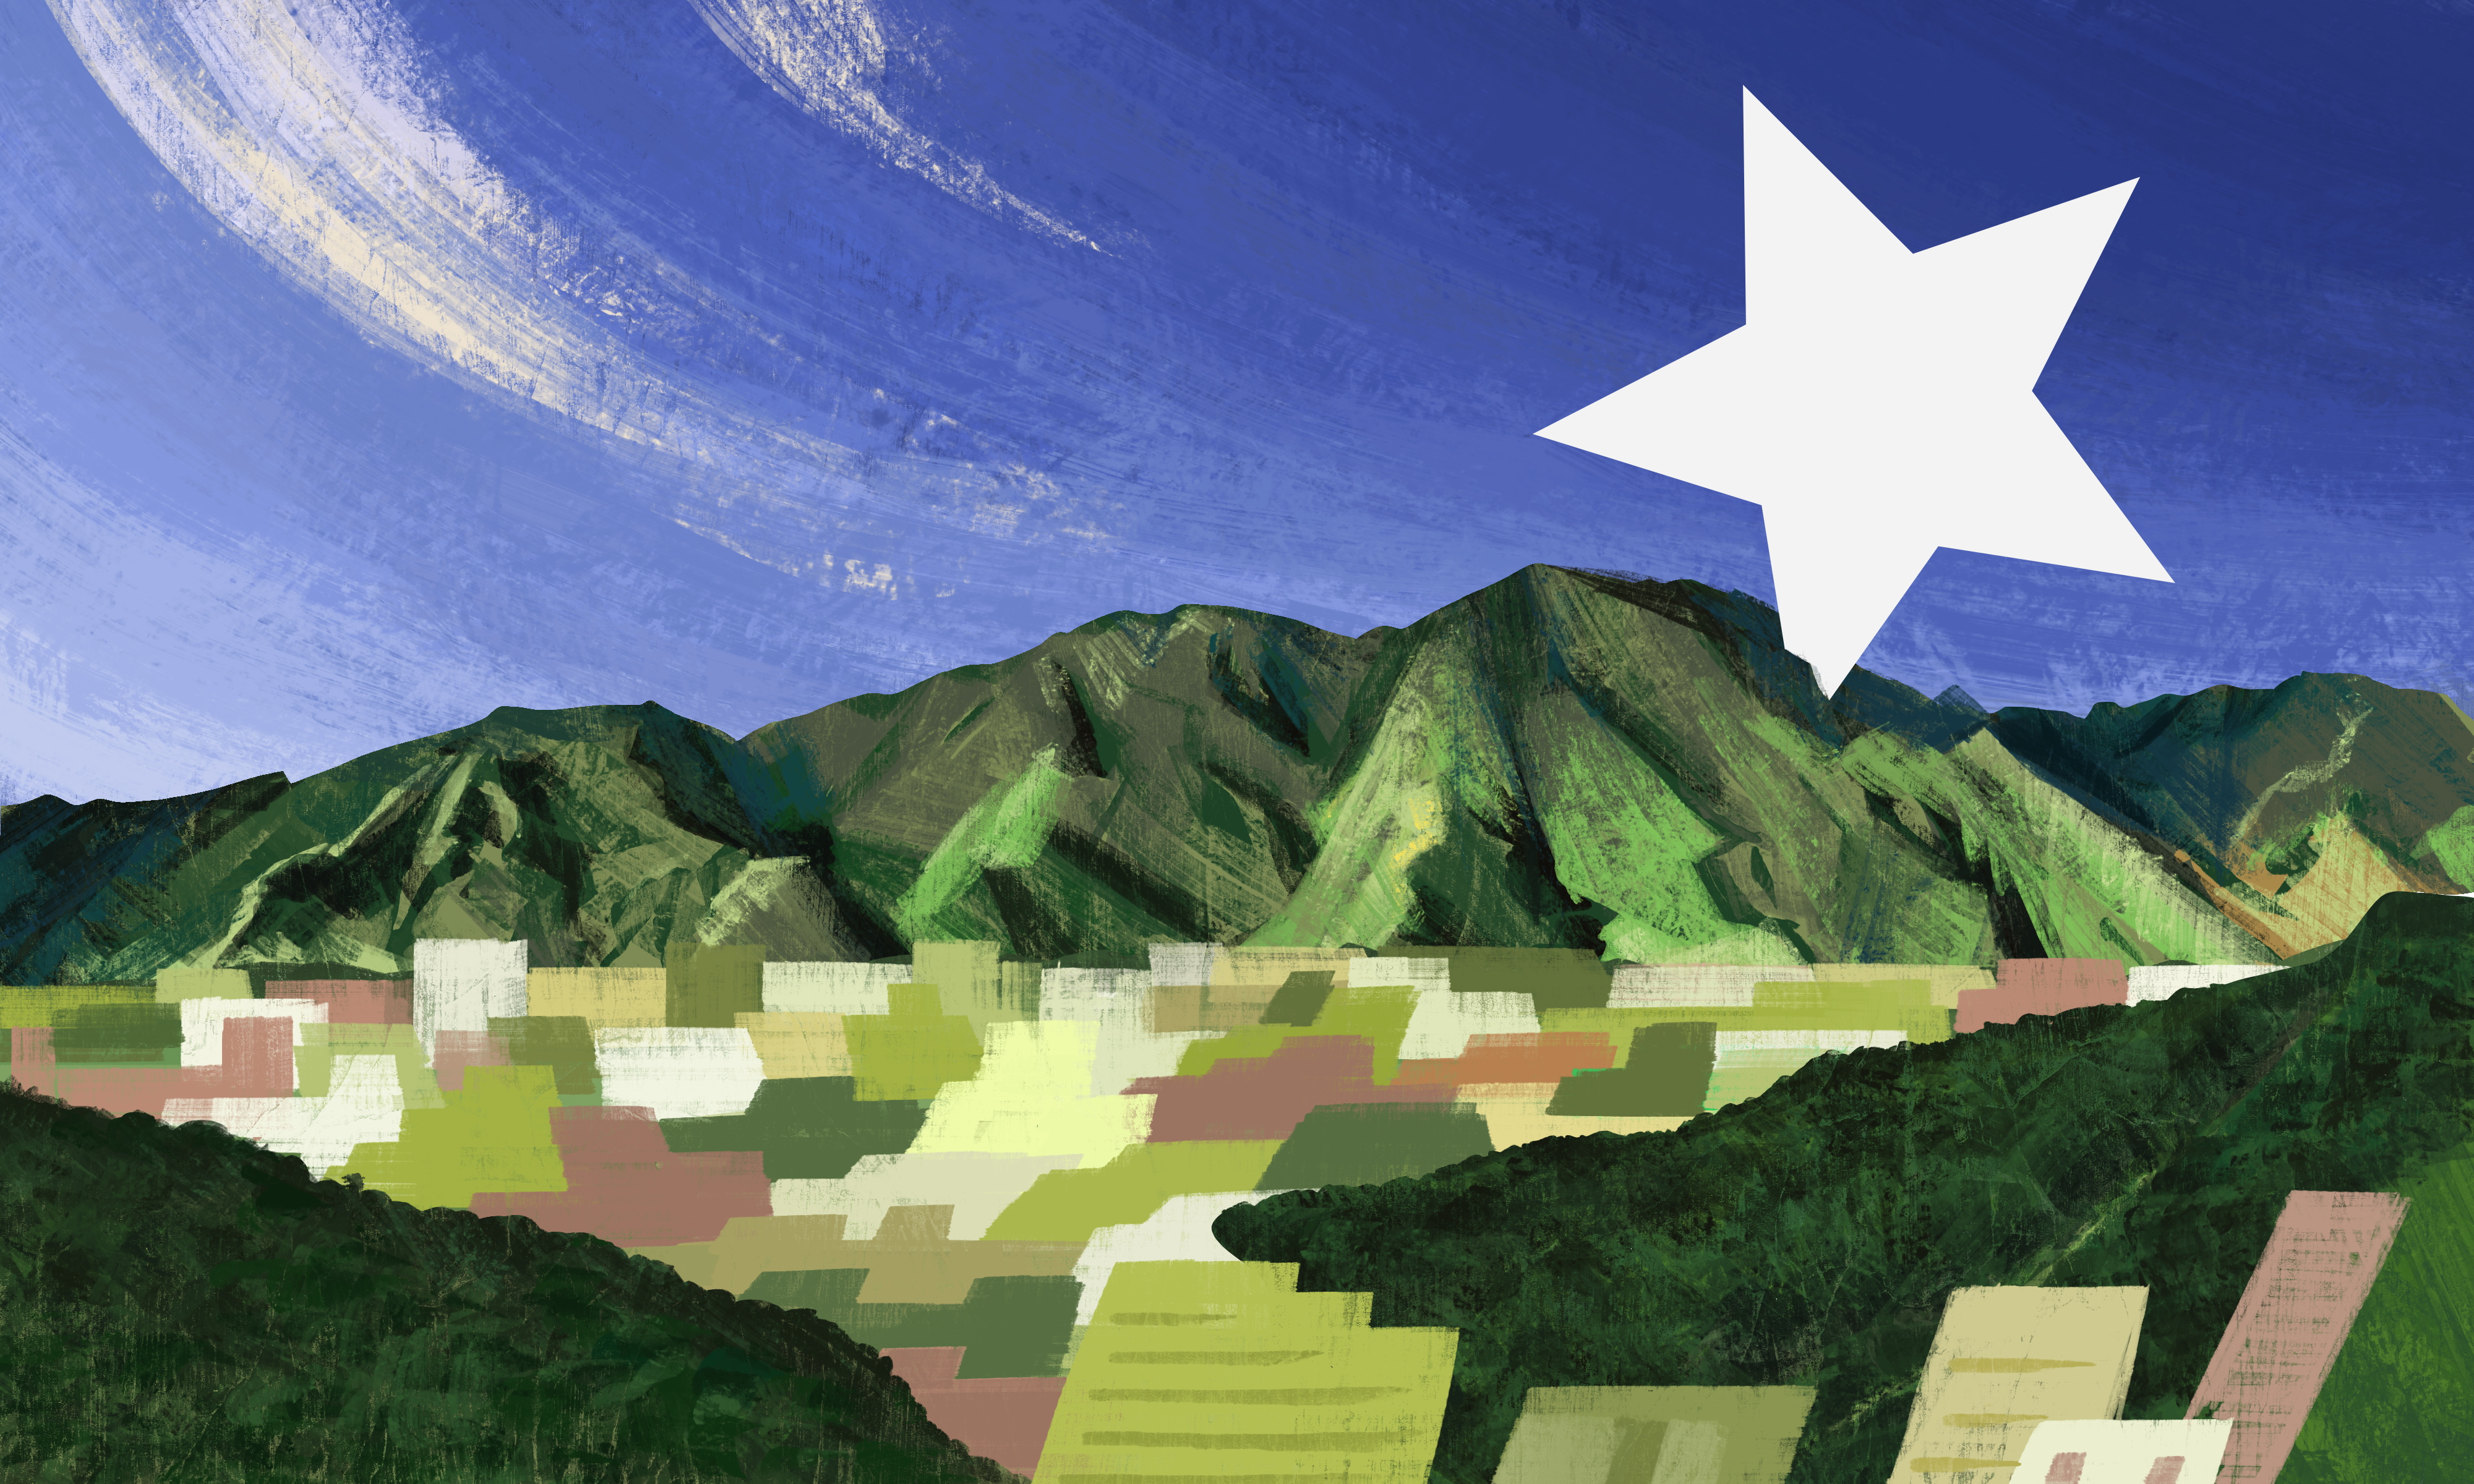 A high angle view of a giant white star silhouette being wedged into the mountains behind Caracas, Venezuela. The star represents Chavez’s reign referencing how he changed the Venezuelan flag to include an eighth star. The star’s intrusion and dangerous teetering has led Erwin Lopez Rada to lose the feeling of safety in his home country.